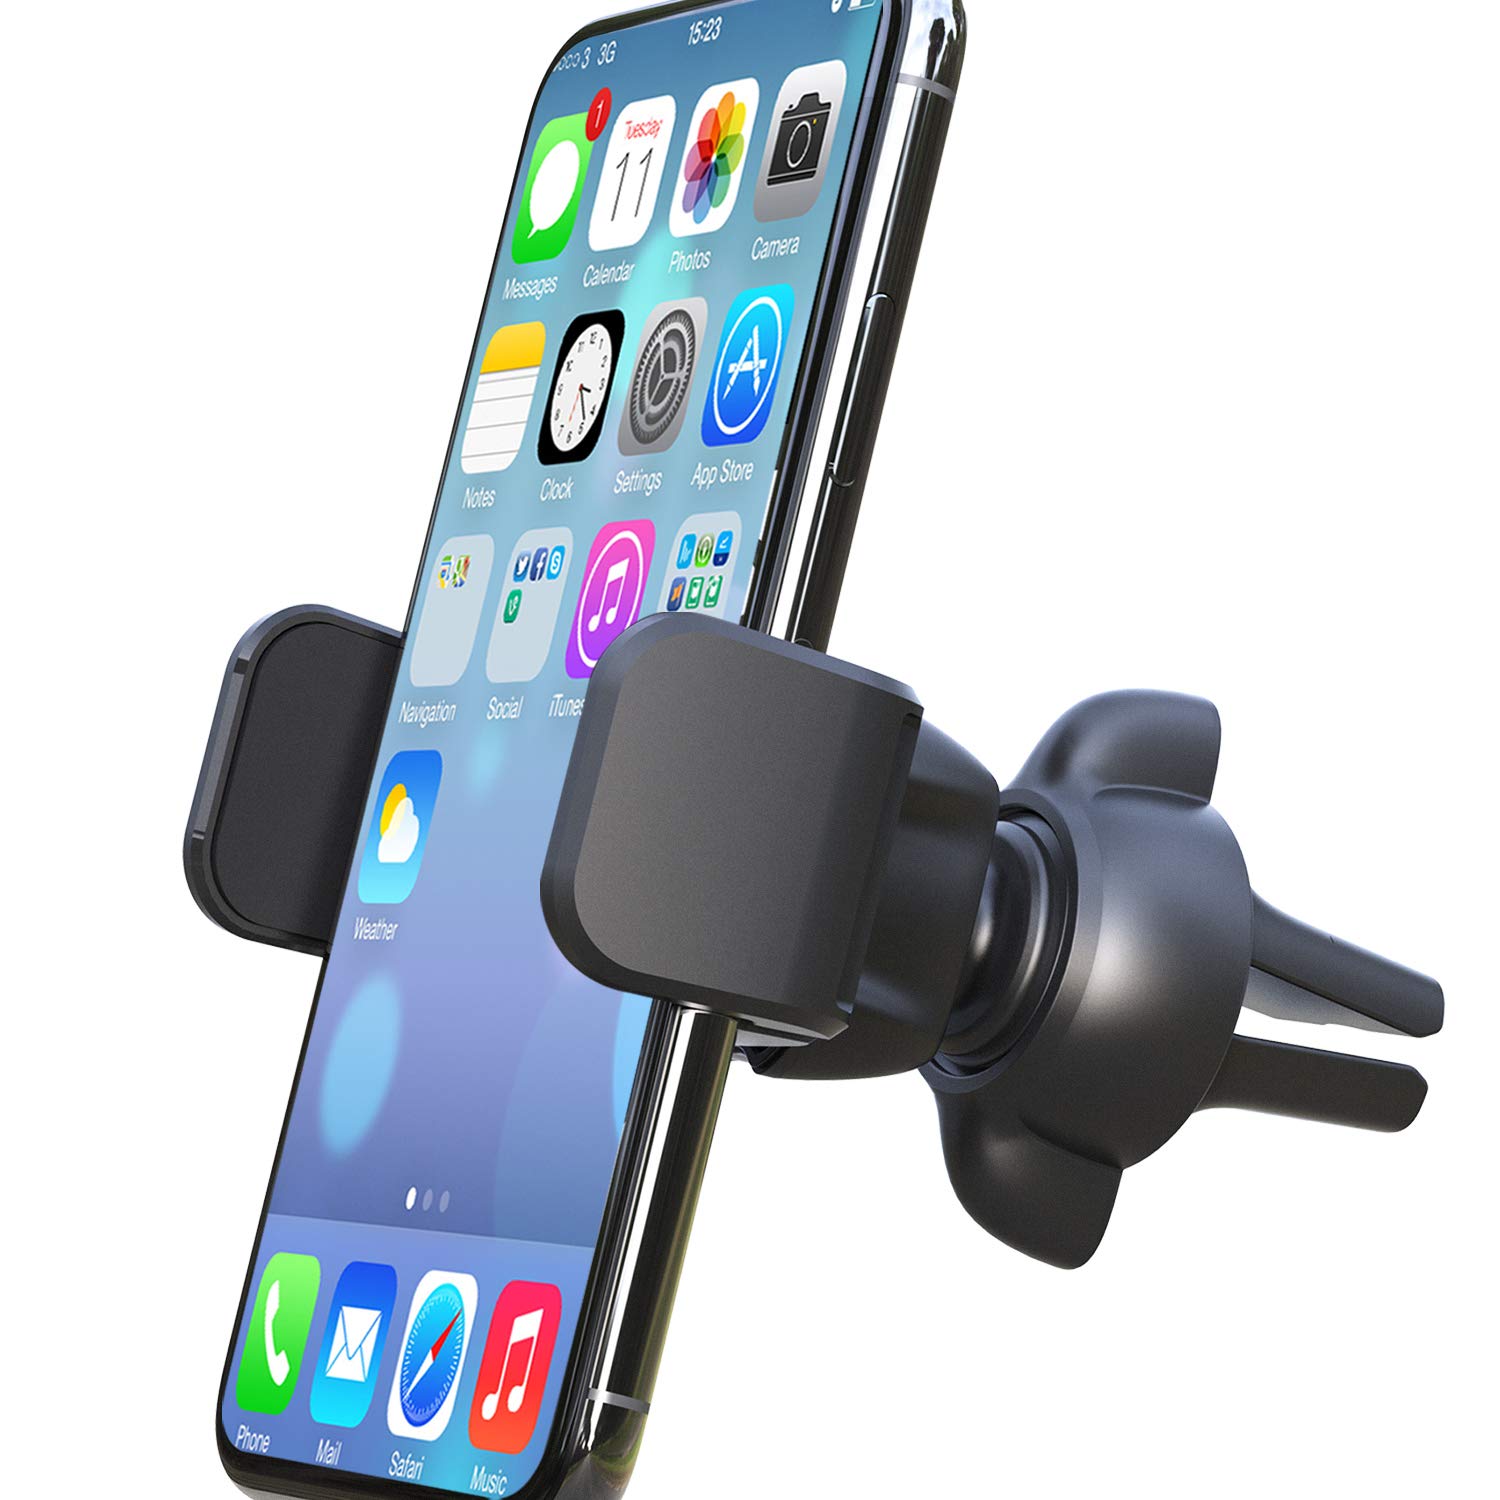 APPS2Car Adjustable Car Vent Phone Mount, with Expandable Spring-Loaded Grip, Universal Strong Hold Air Vent Cell Phone Holder for Car with Super Sturdy Grips, Fit with iPhone and Other Android Phones